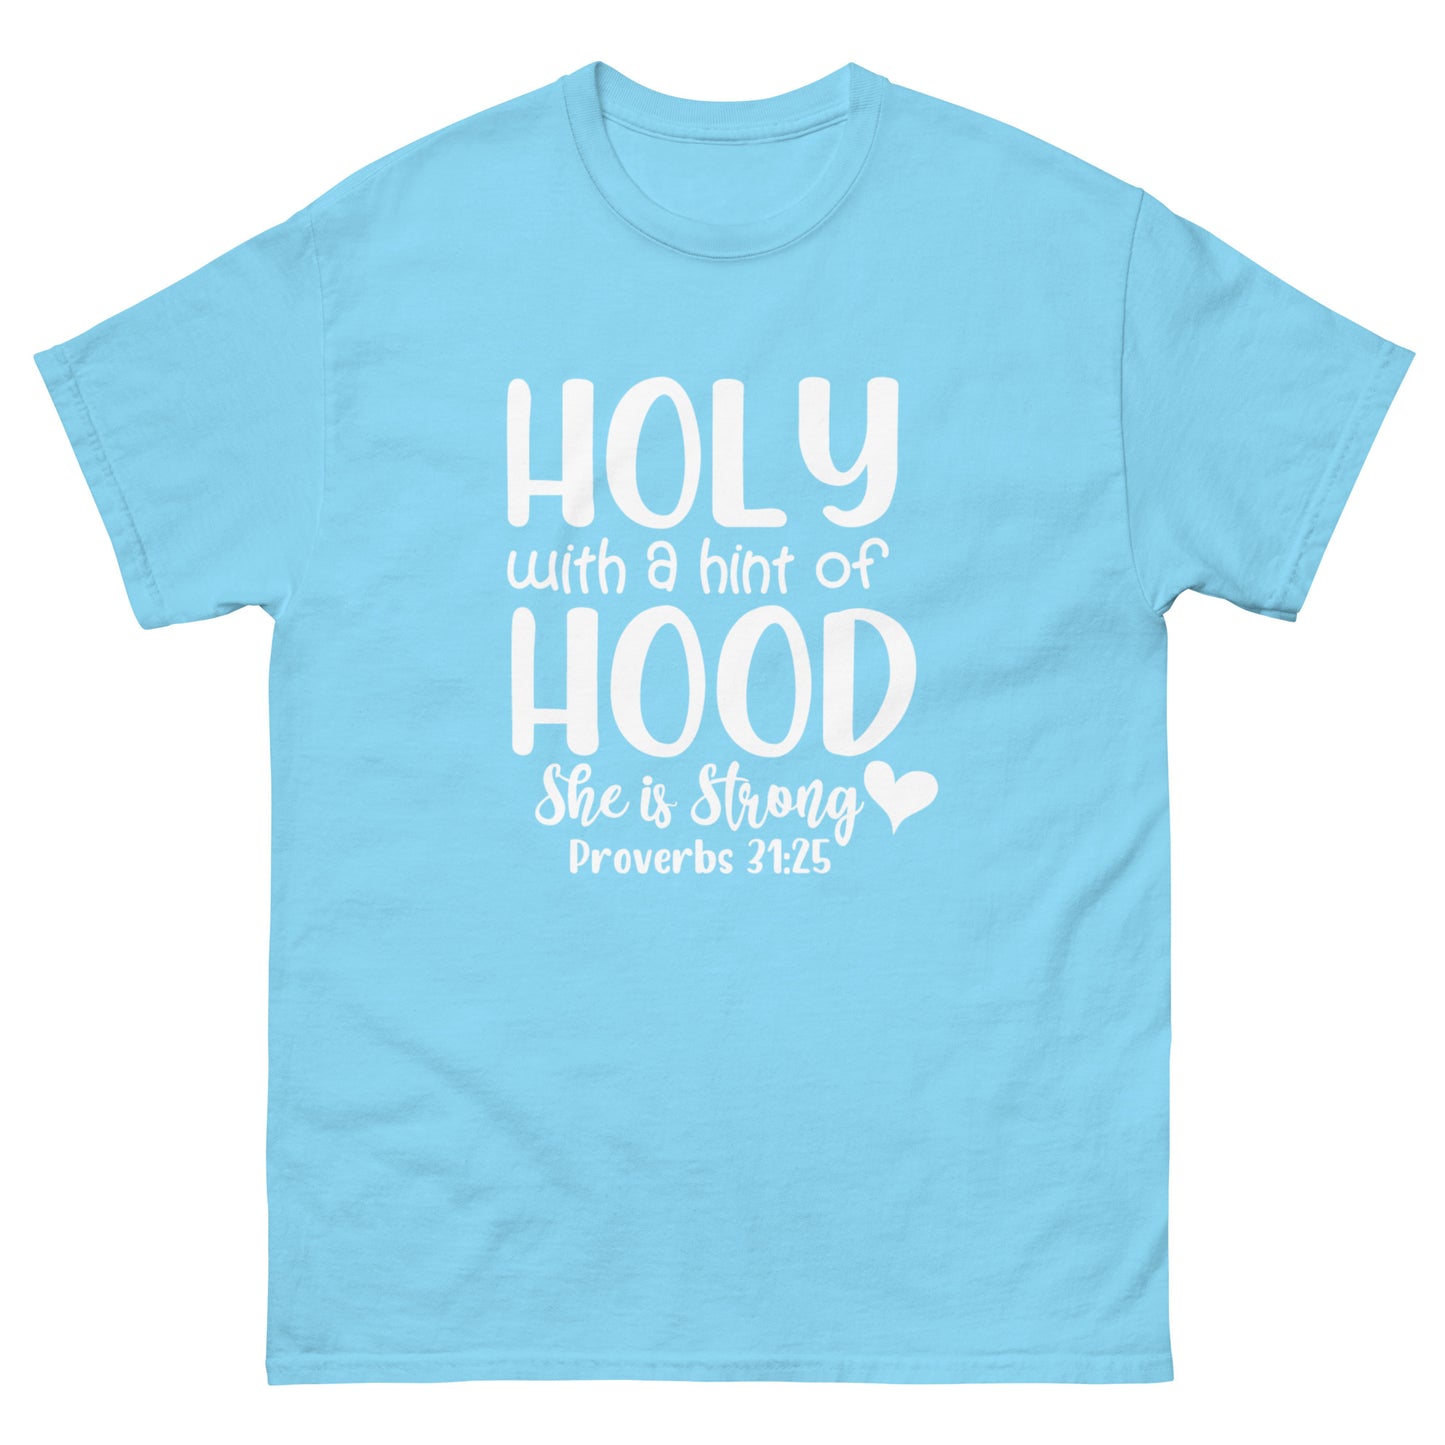 Holy with a hint of Hood - classic tee